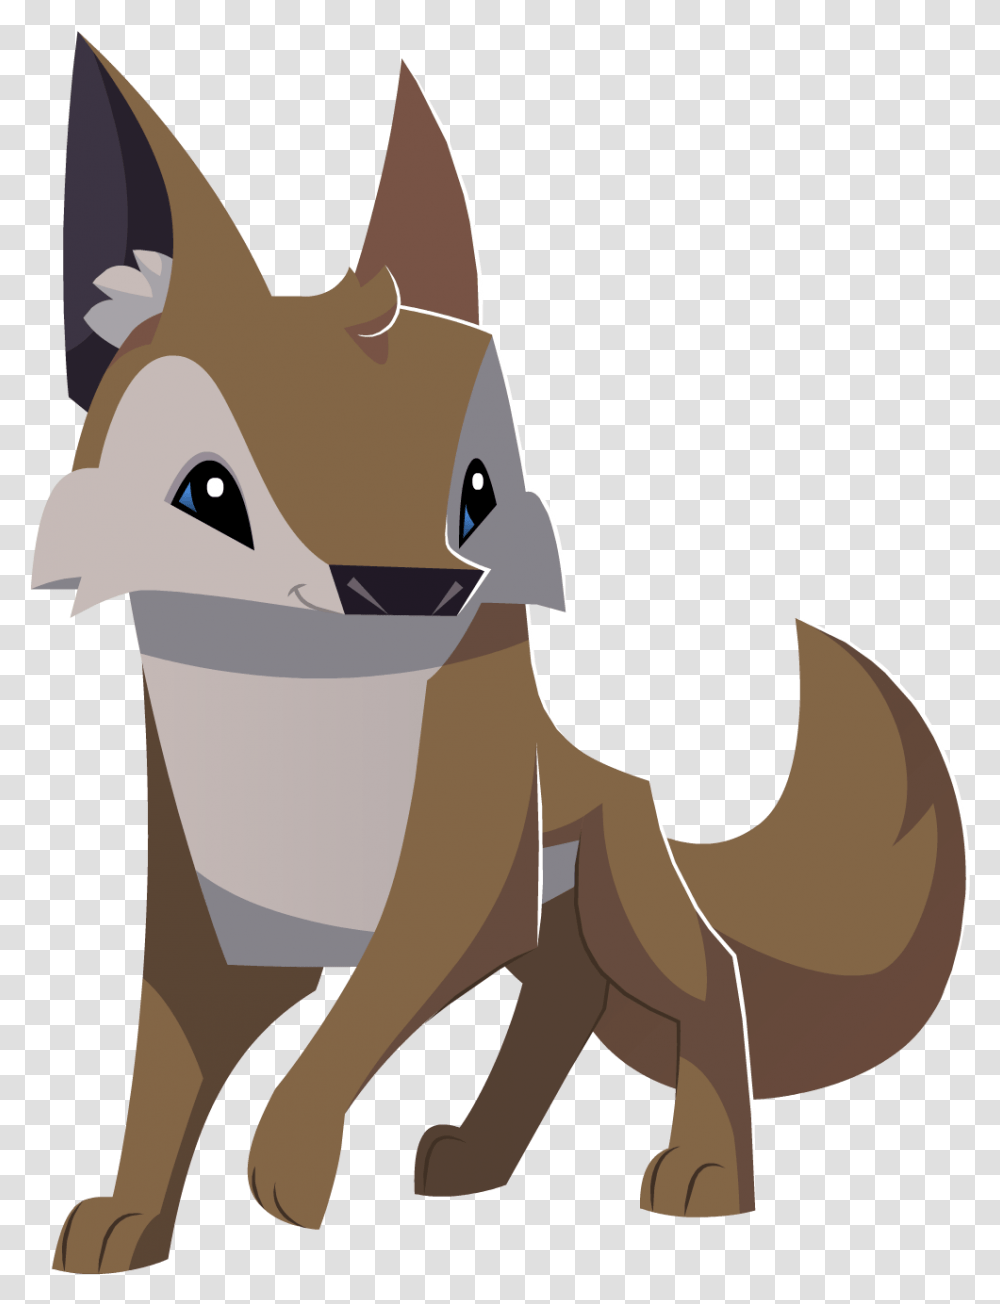 Download Hd Coyote Graphic Thing Animal Jam Play Wild Animal Jam Play Wild Coyote, Mammal, Label, Text, Cat Transparent Png